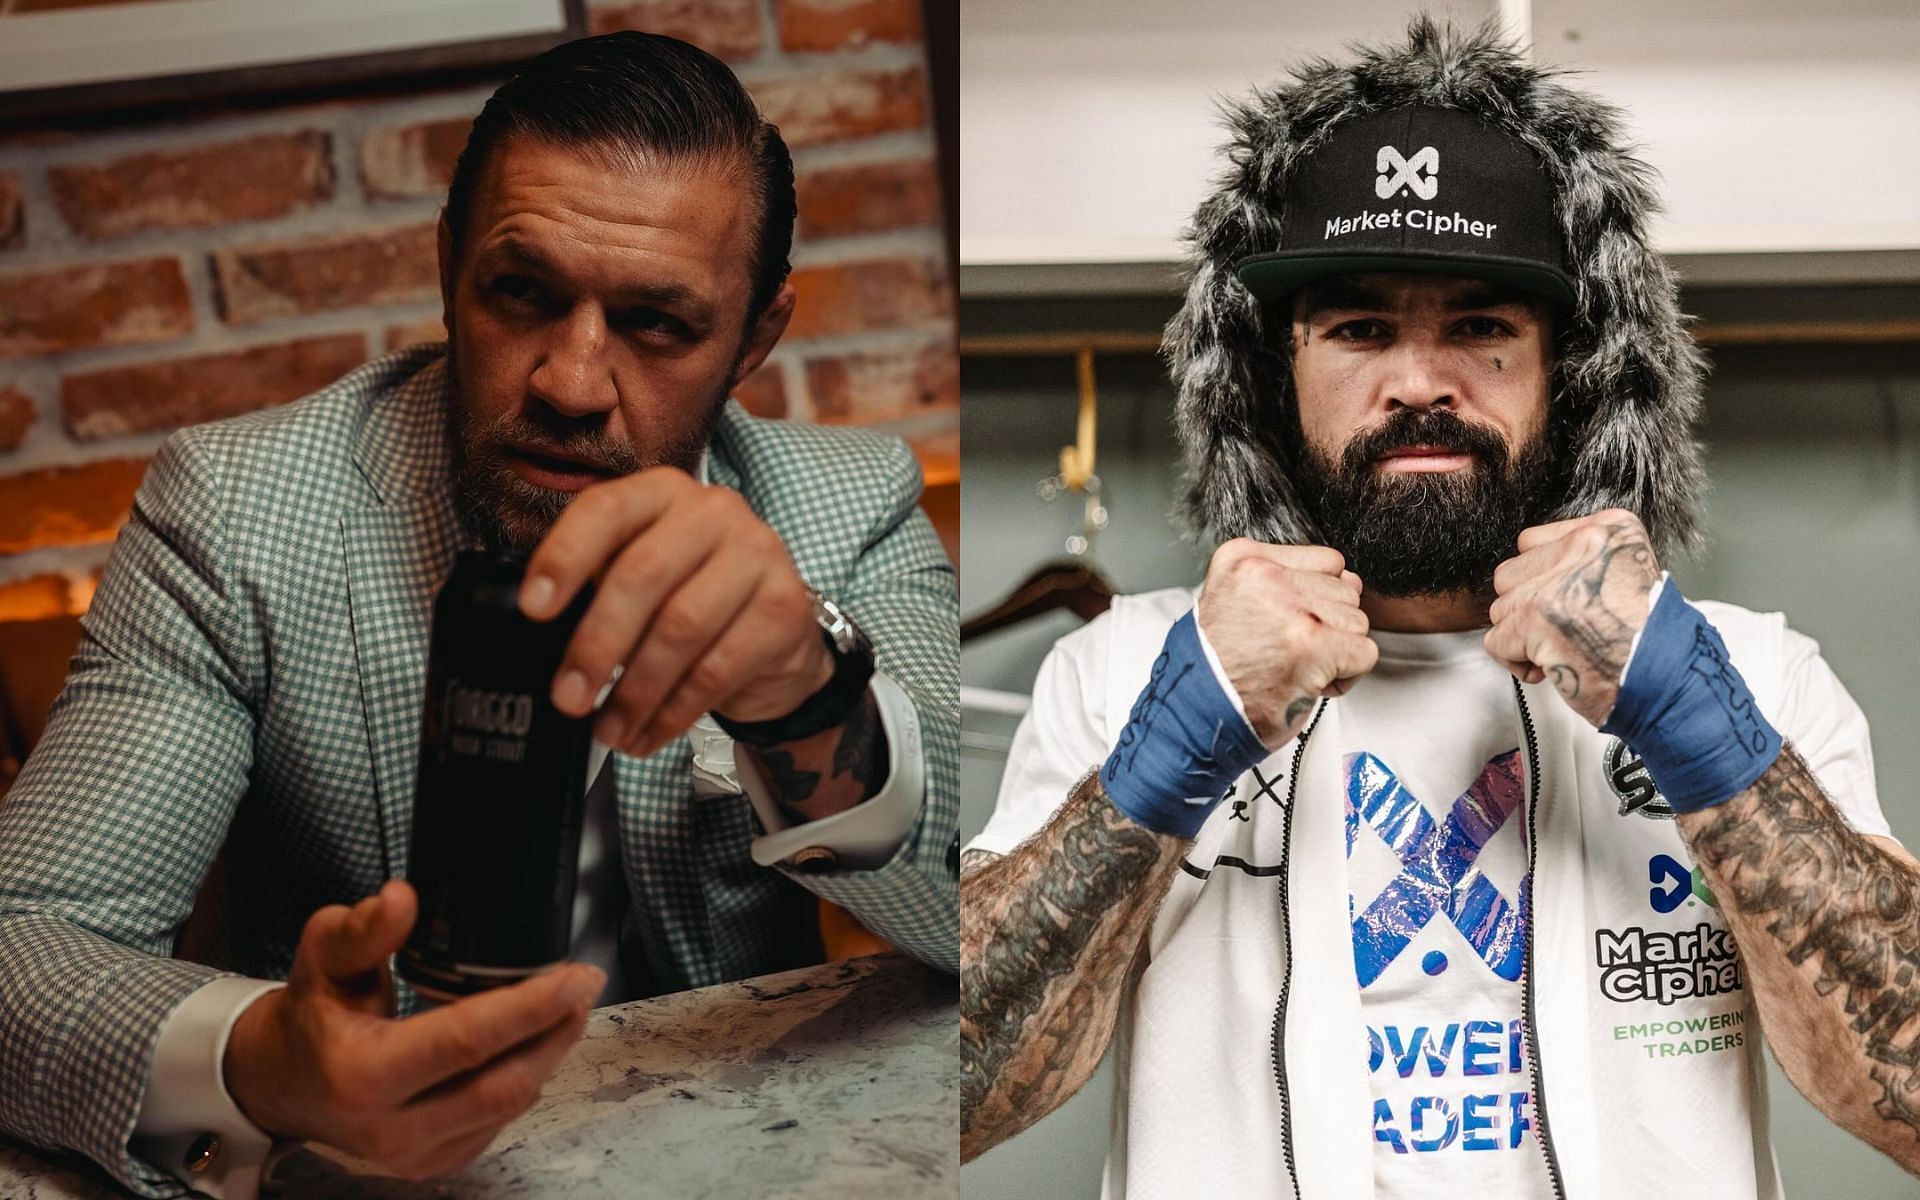 Mike Perry (right) offers an unusual challenge to Conor McGregor (left) [Image via: @thenotoriousmma and platinummikeperry on Instagram]